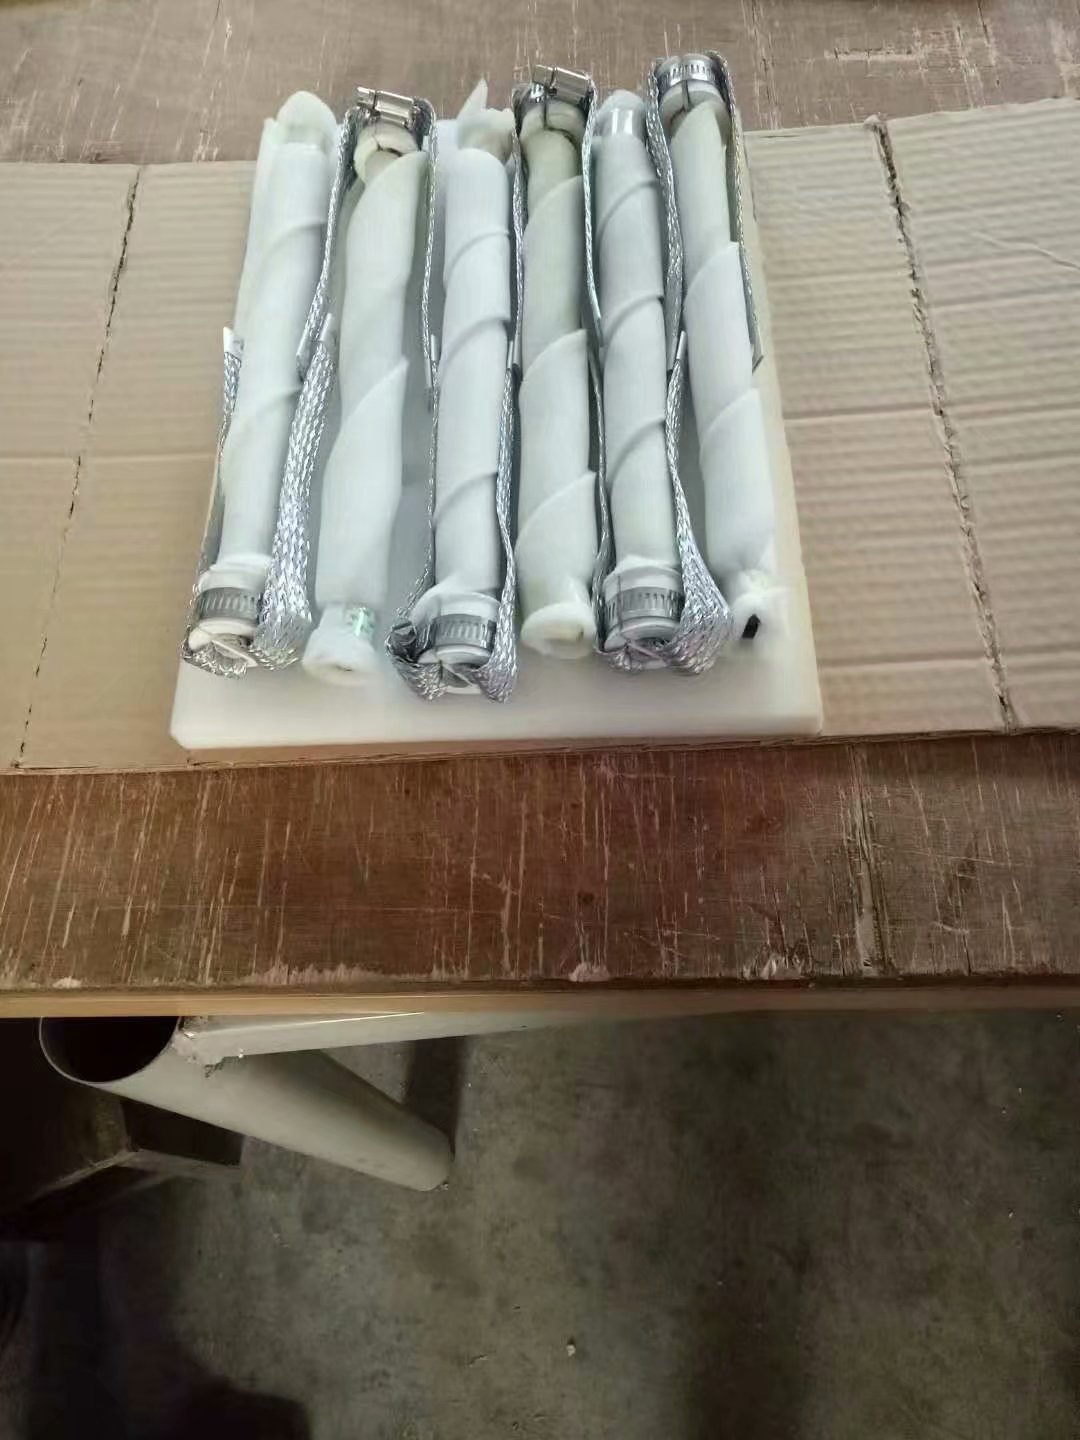 Double Spiral SiC Heating Elements' Packaging